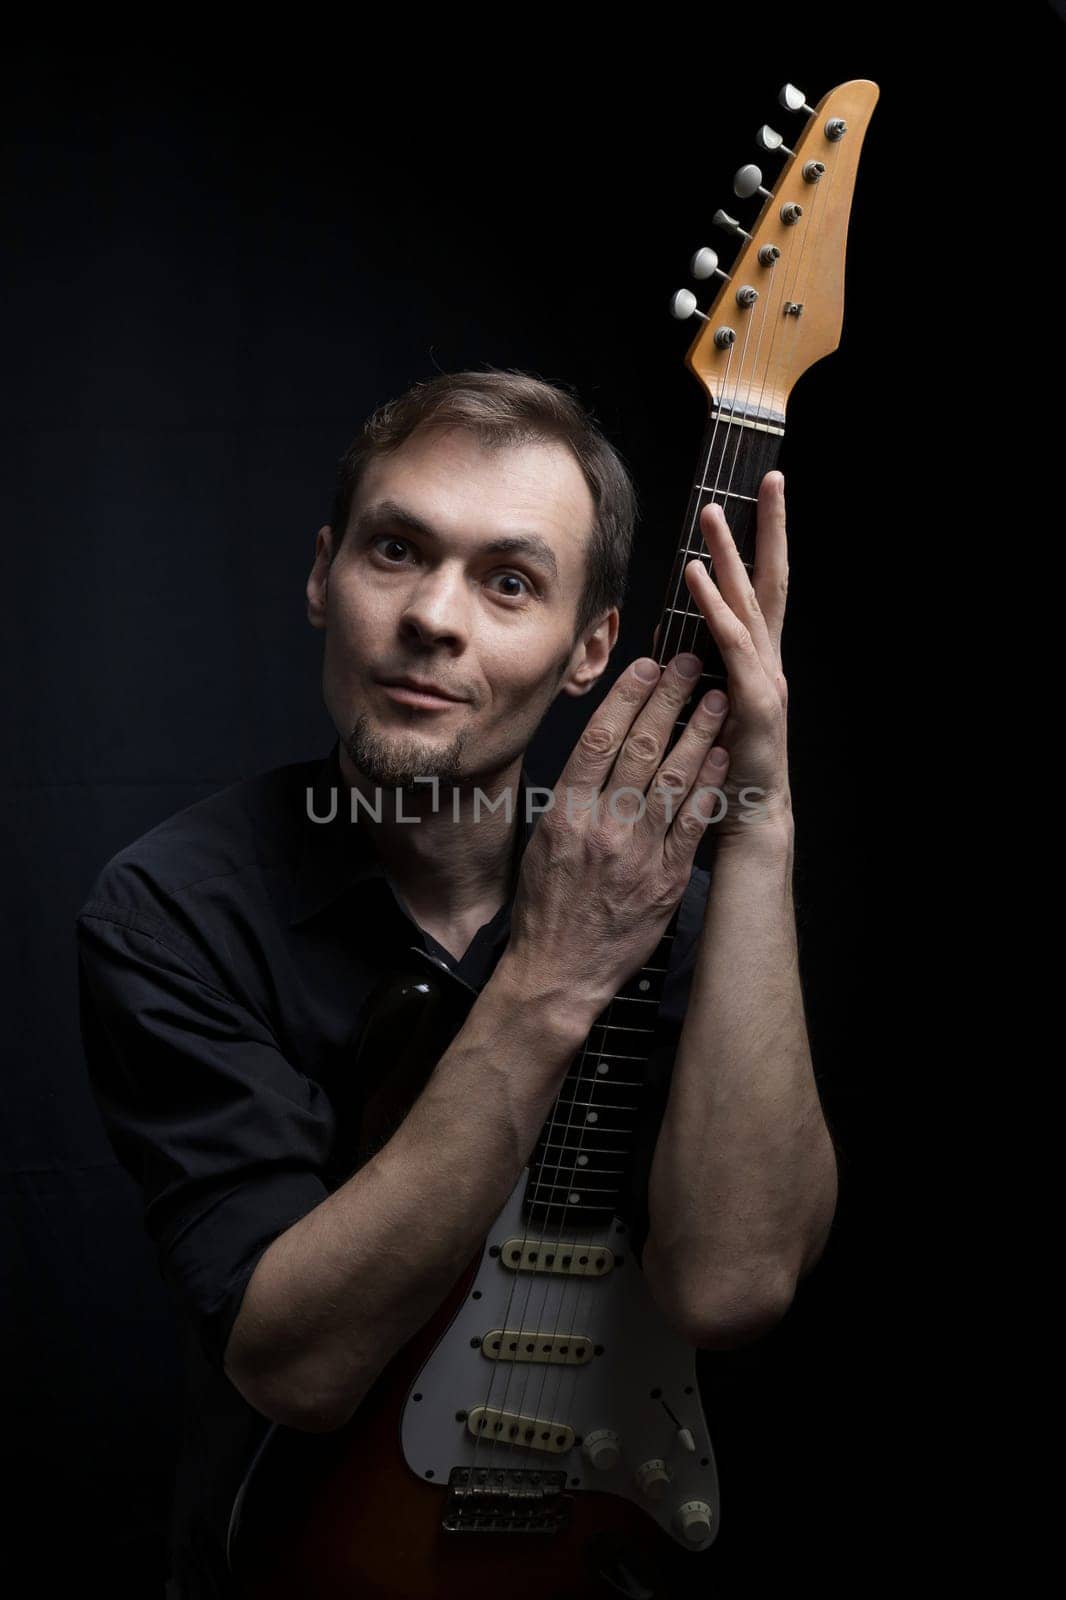 Expressive portrait of a caucasian man with an electric guitar on a dark background.